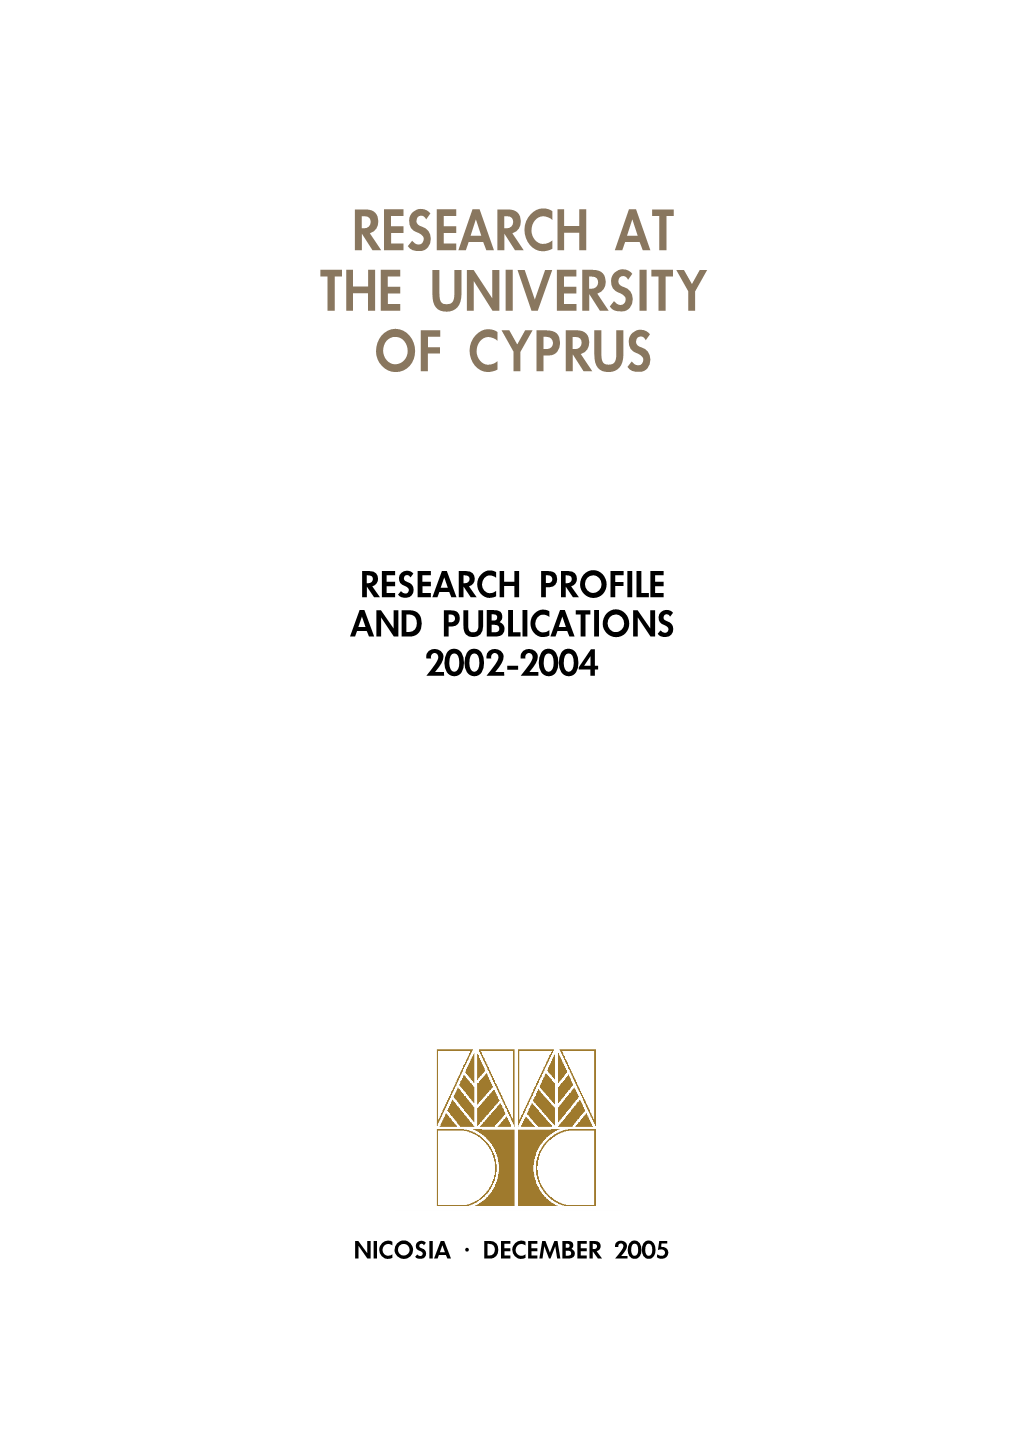 Research at the University of Cyprus